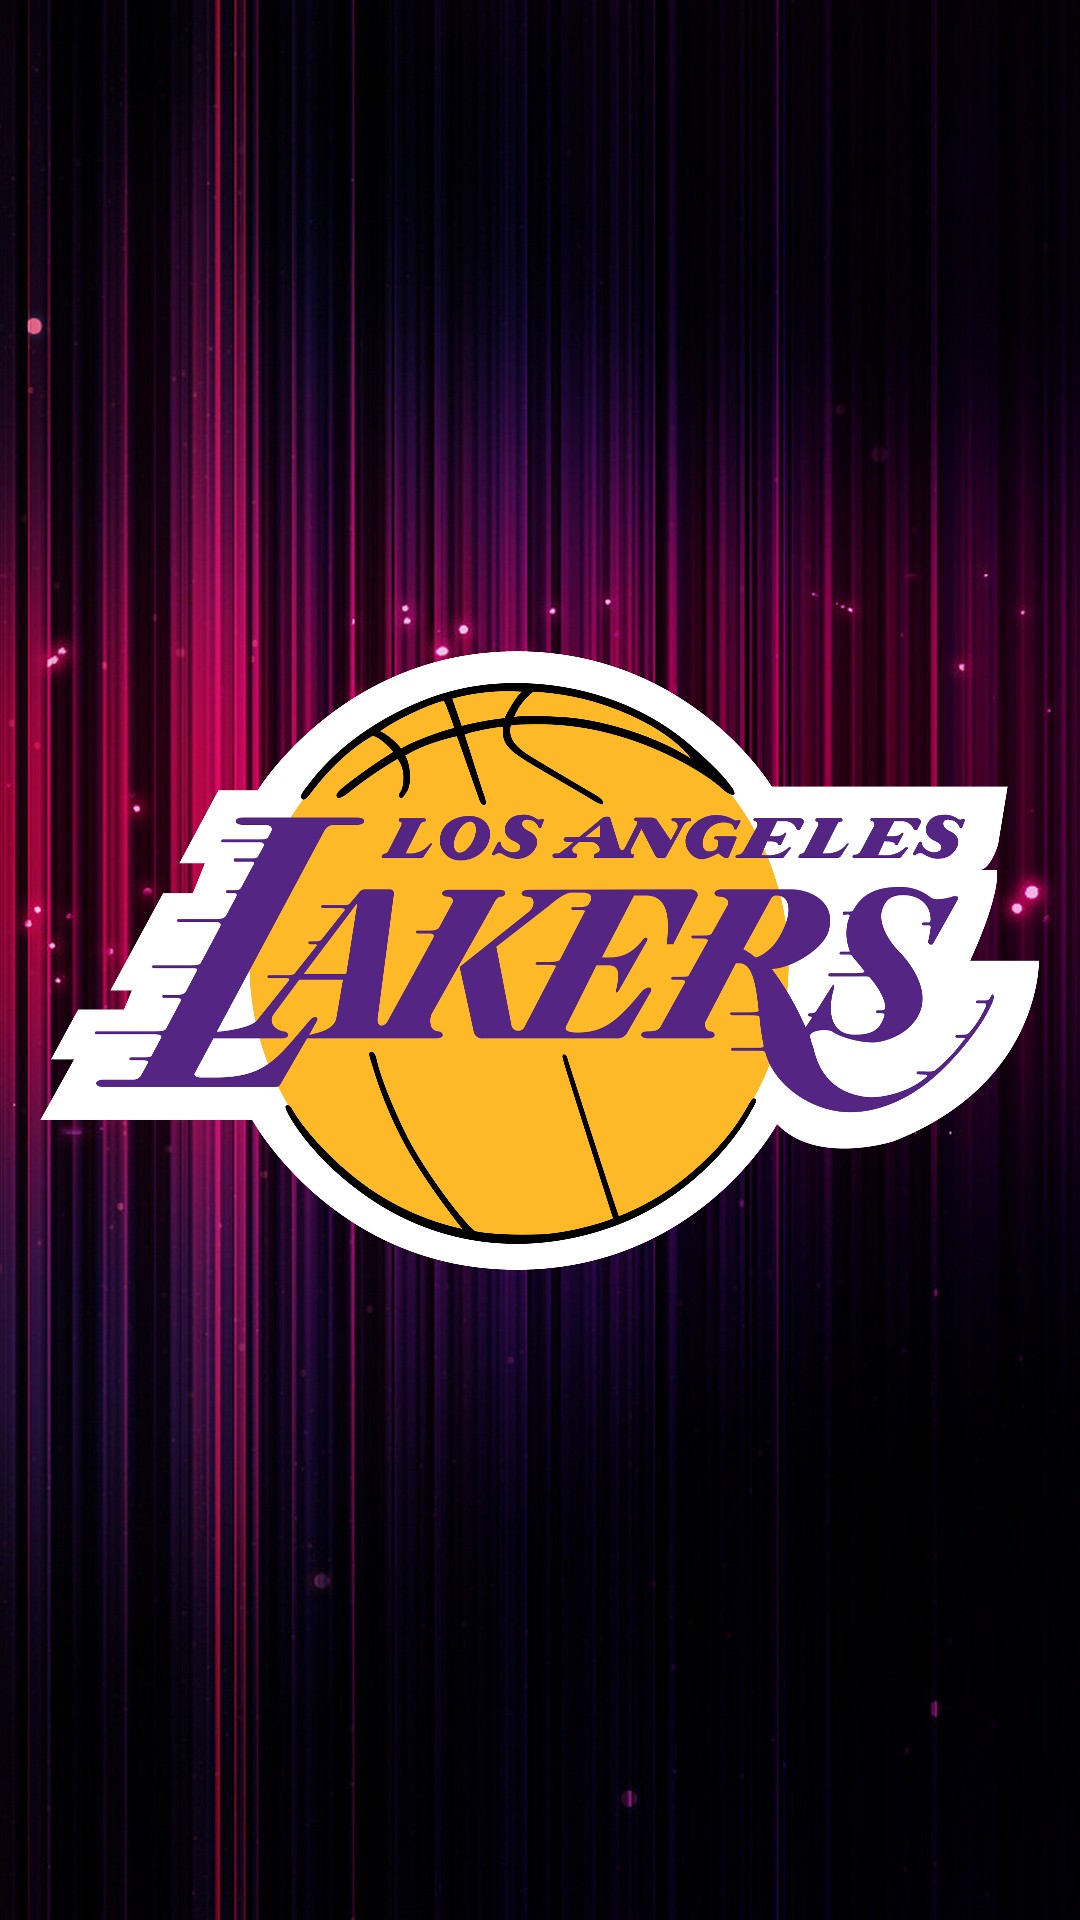 La Lakers Iphone Home Screen Wallpaper With High-resolution - Angeles Lakers - HD Wallpaper 